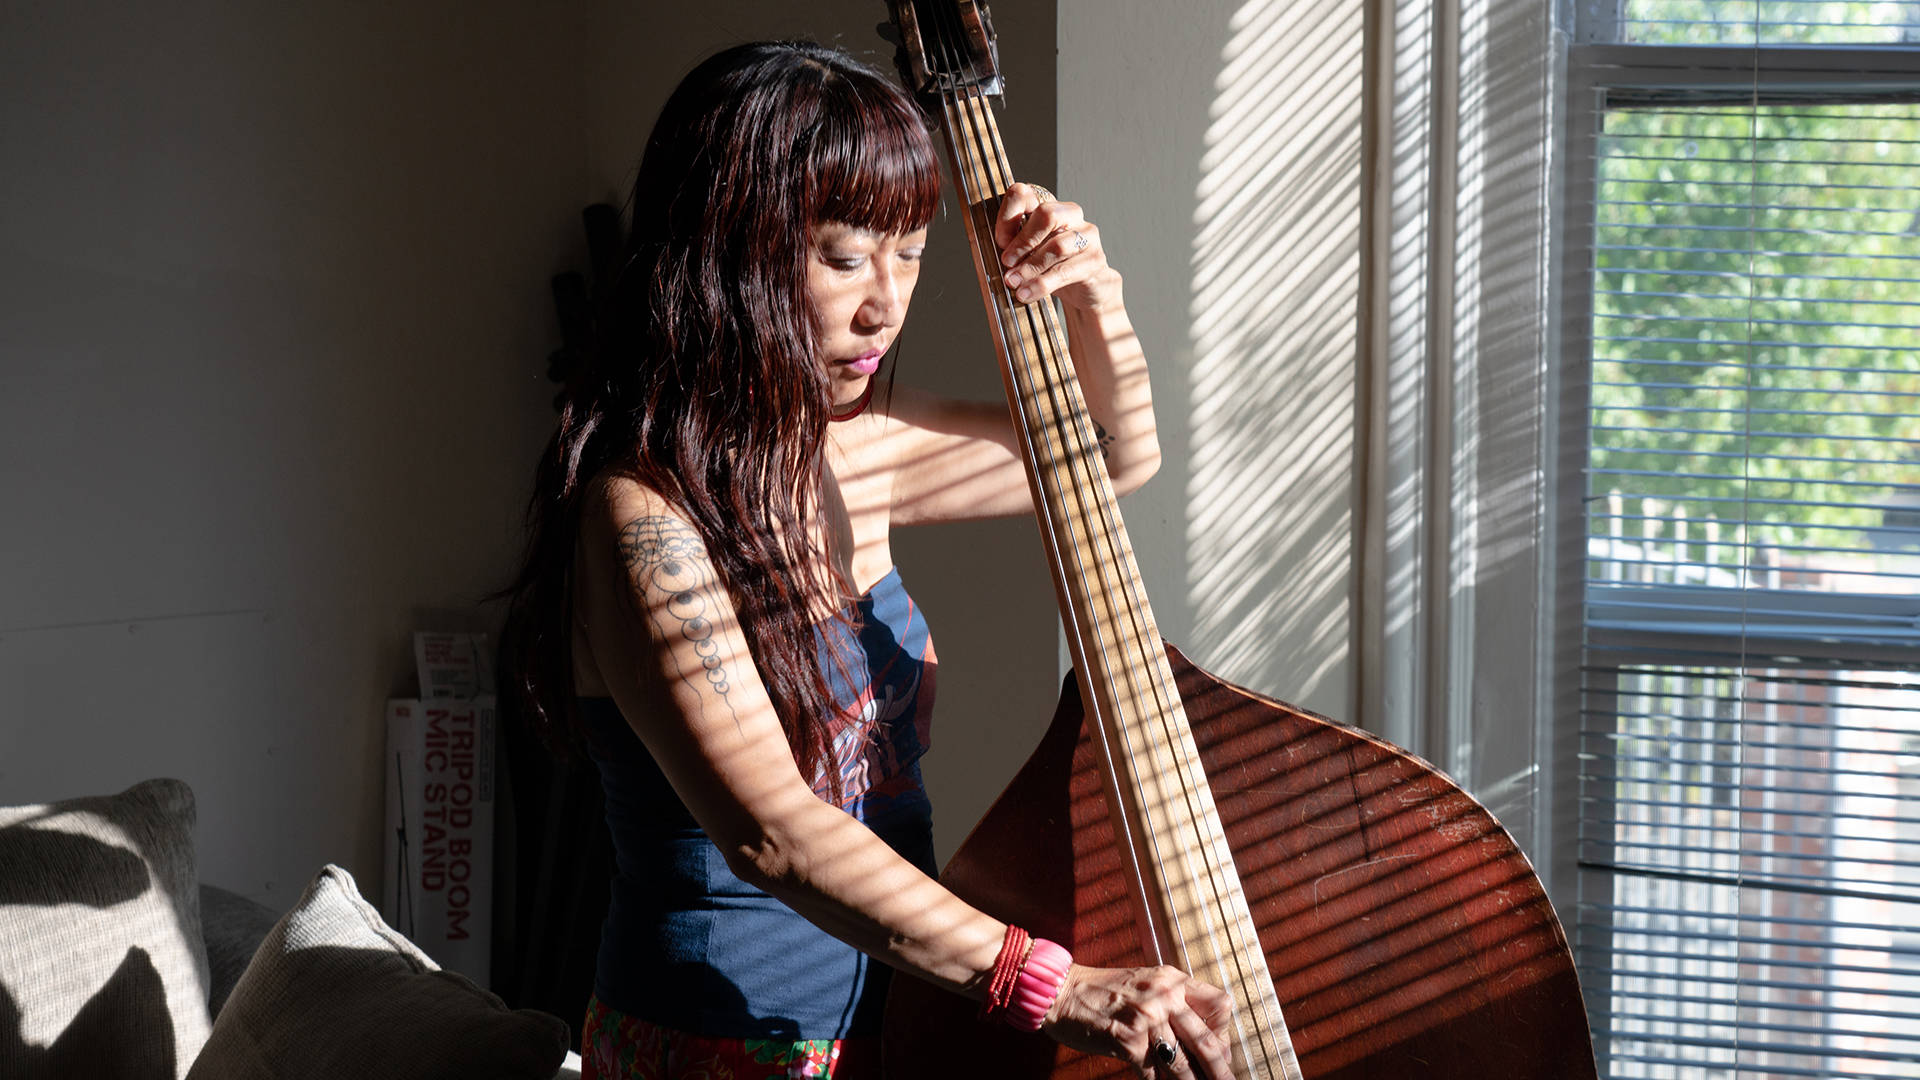 Active in the Bay Area's jazz scene since 1999, Caroline Chung became bandleader to advocate for fair pay for herself and her players. Graham Holoch